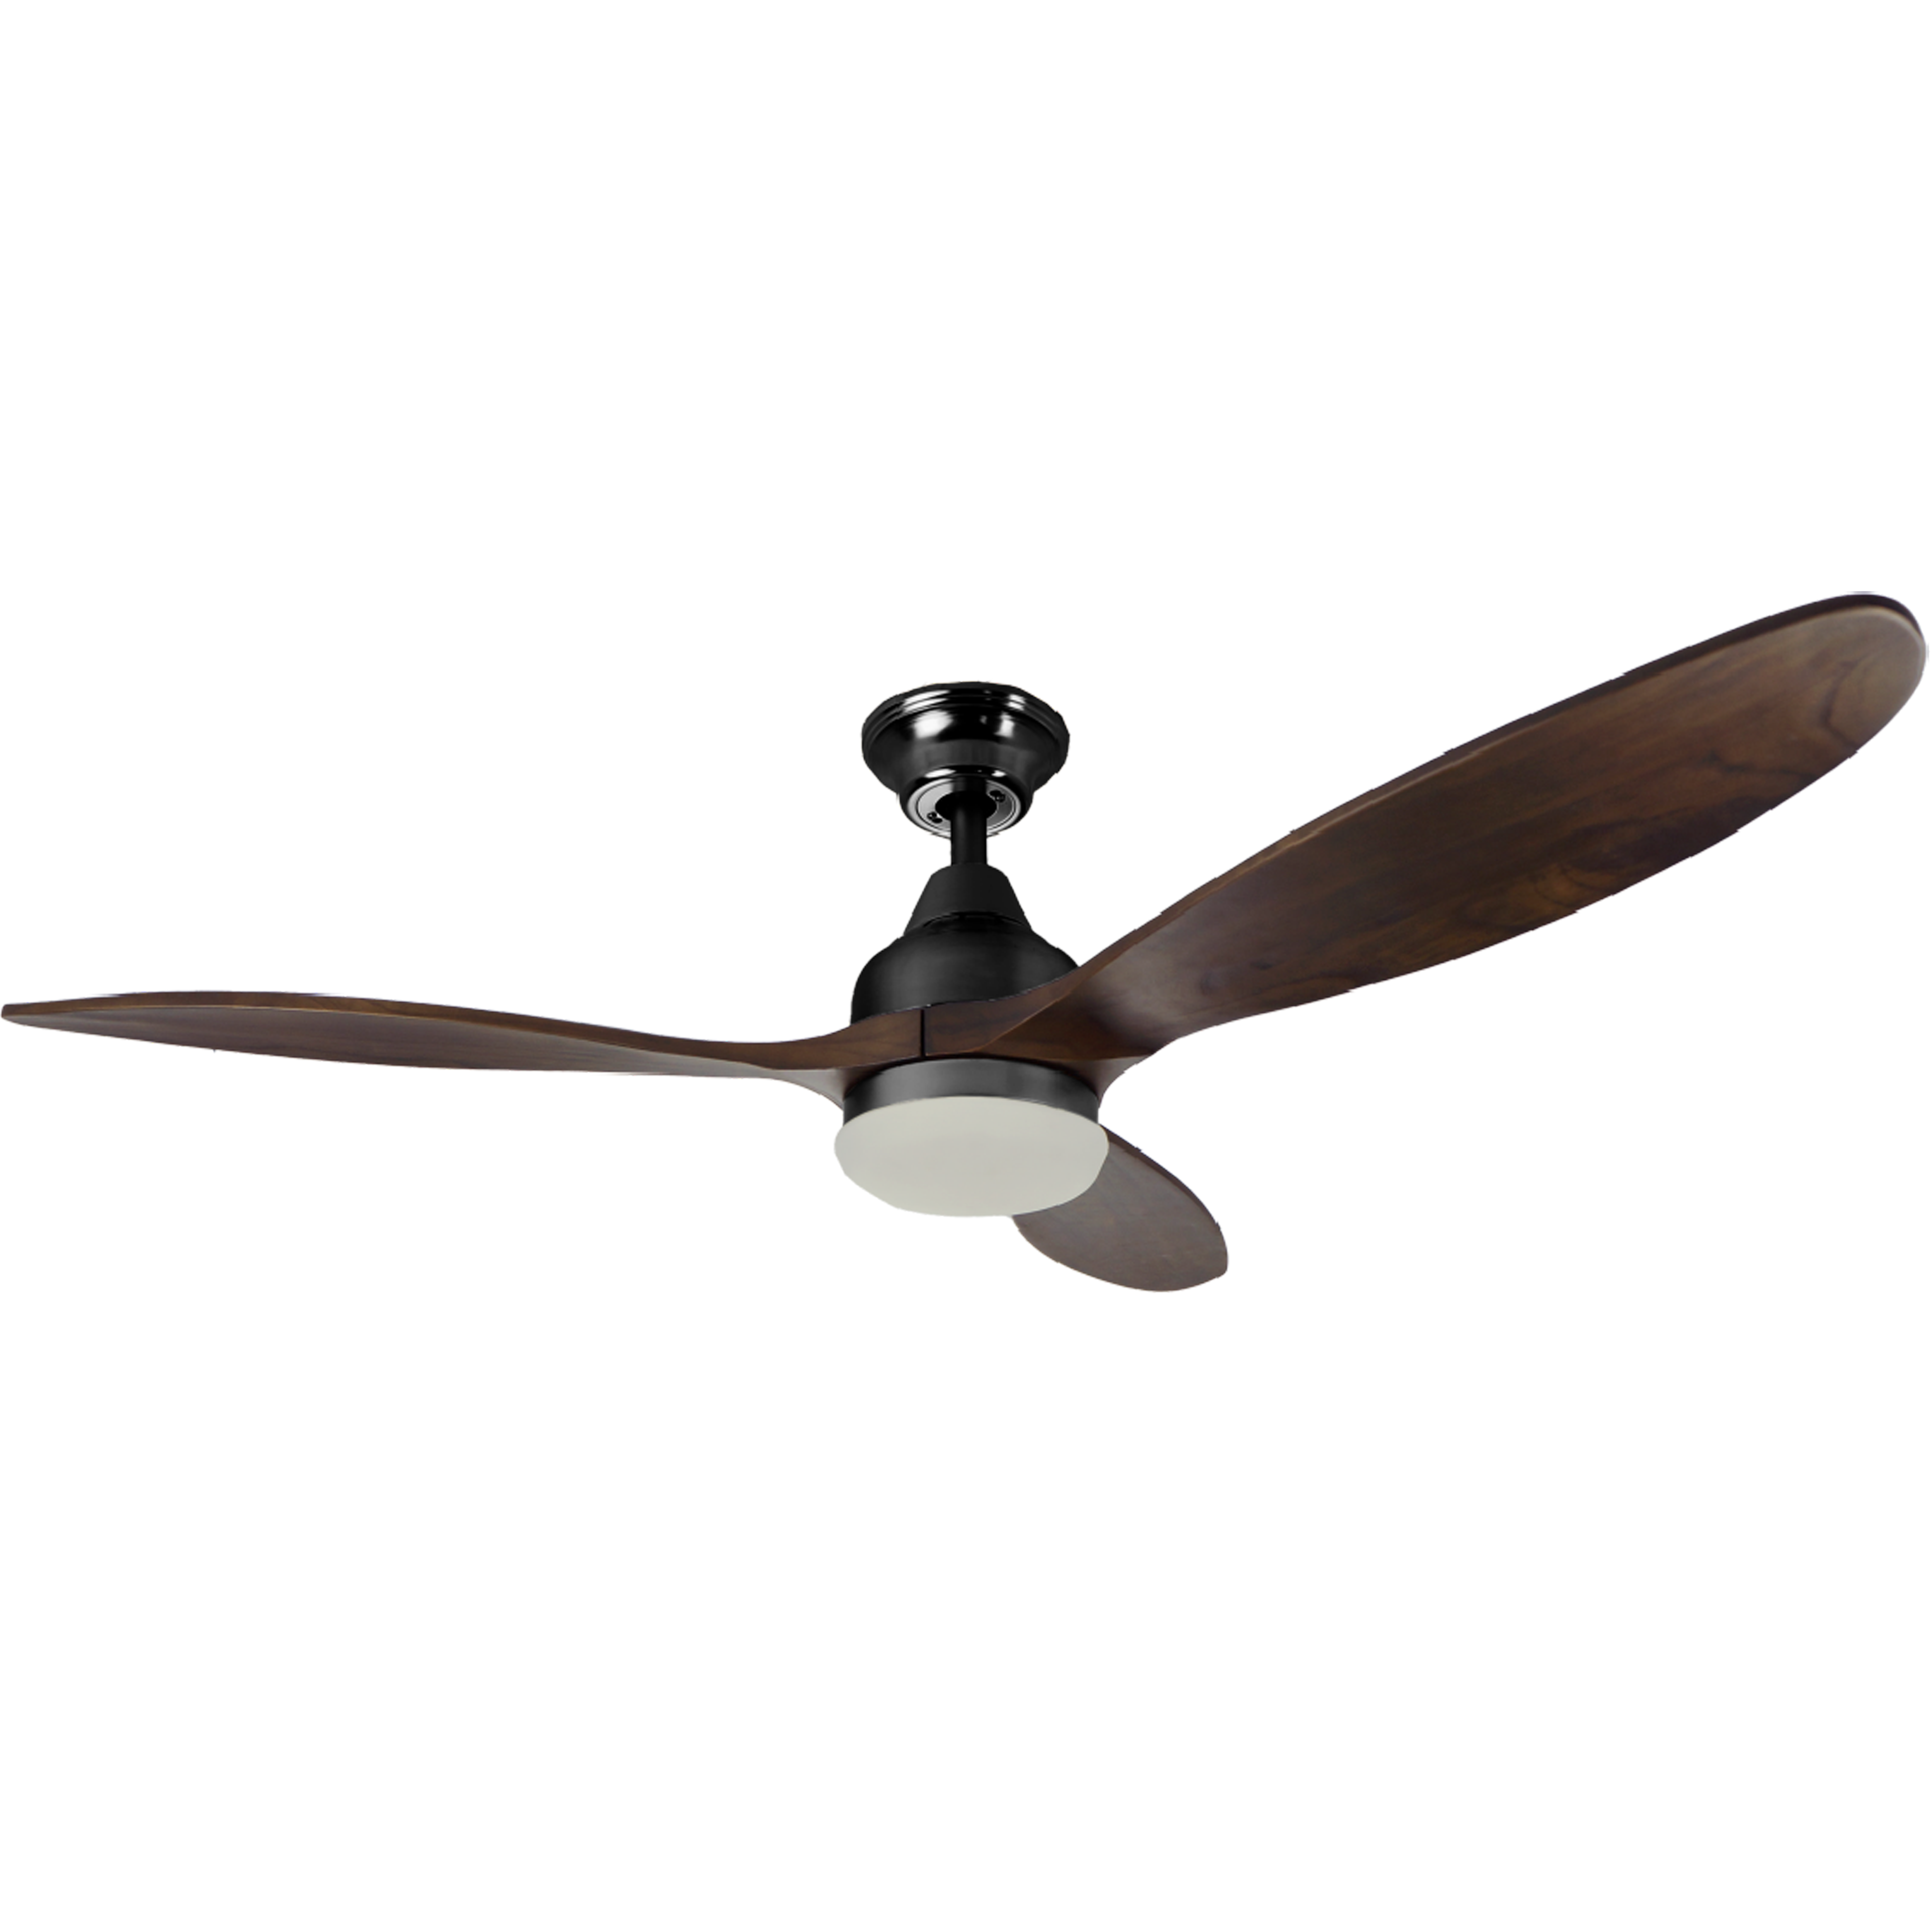 Airbena Suppliers 52'' Ceiling Fan Export Price Ceiling Fan National Remote Control High Speed Solid Wooden Ceiling Fan